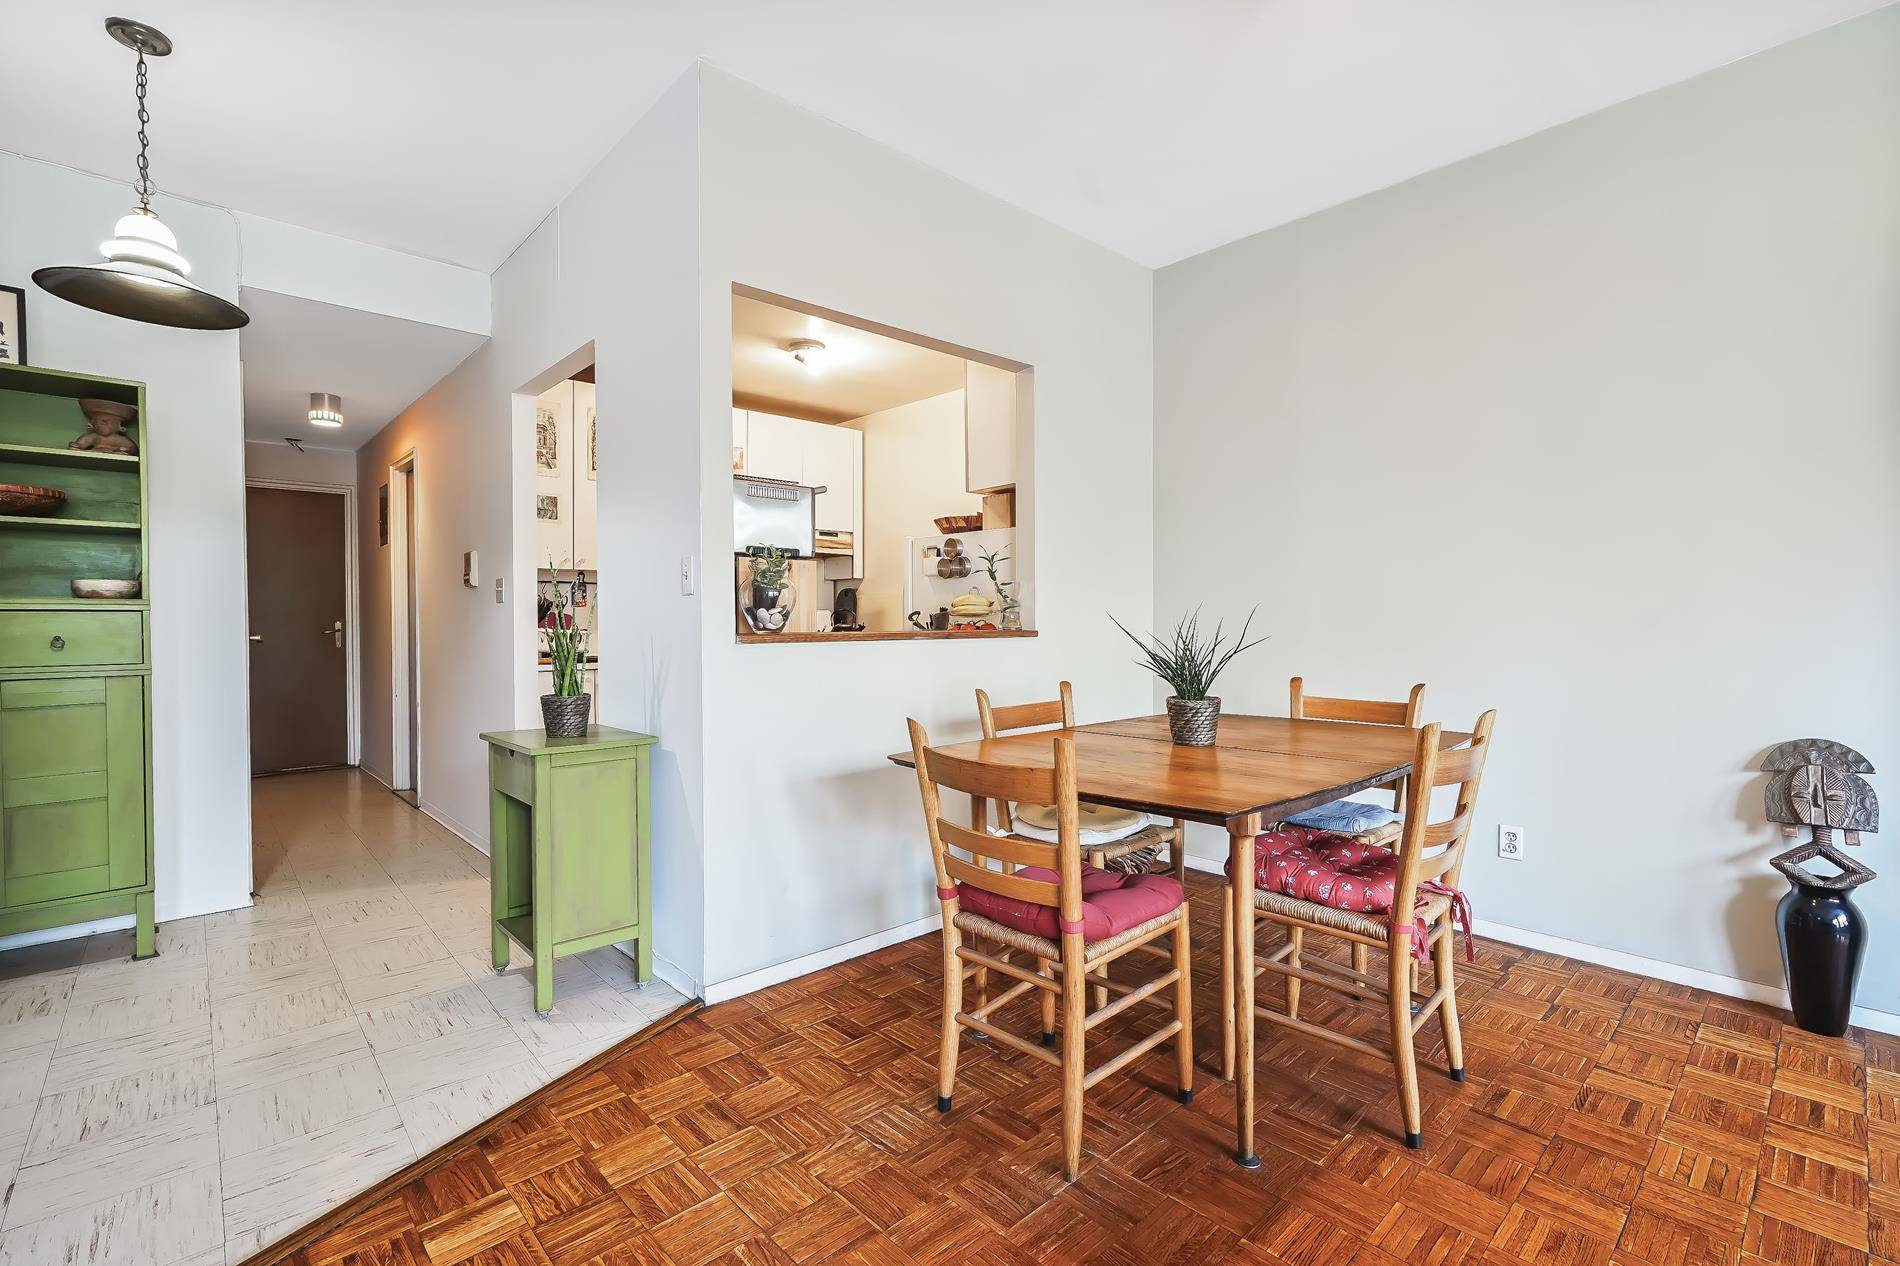 This Spacious condo is adjacent to the vibrant 5th Avenue in Park Slope, steps to many local restaurants and a short stroll to the Barclay Center and Atlantic Terminal.